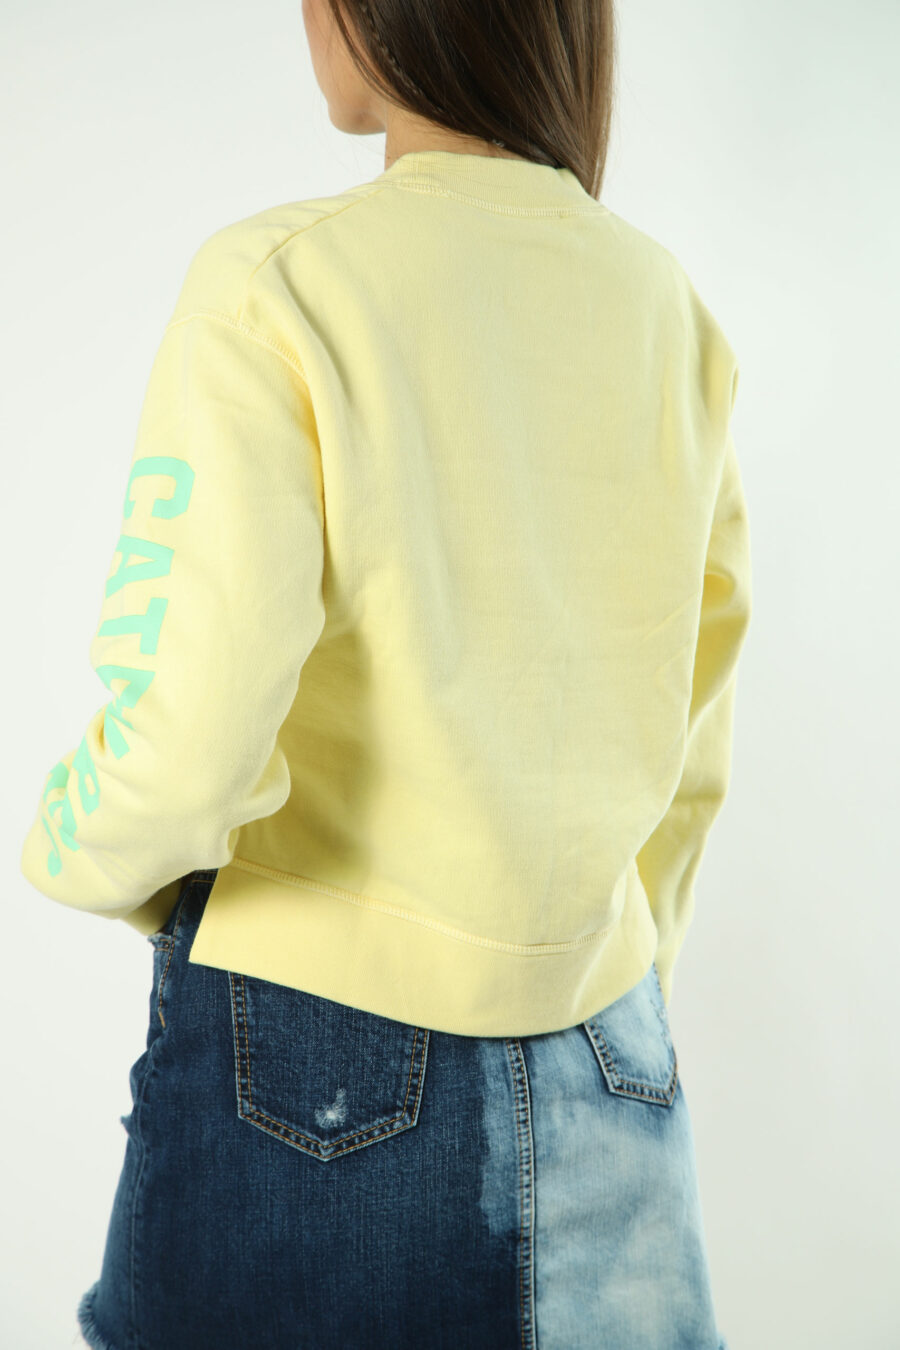 Yellow sweatshirt with green maxilogo and text on sleeves - 8052134554463 2